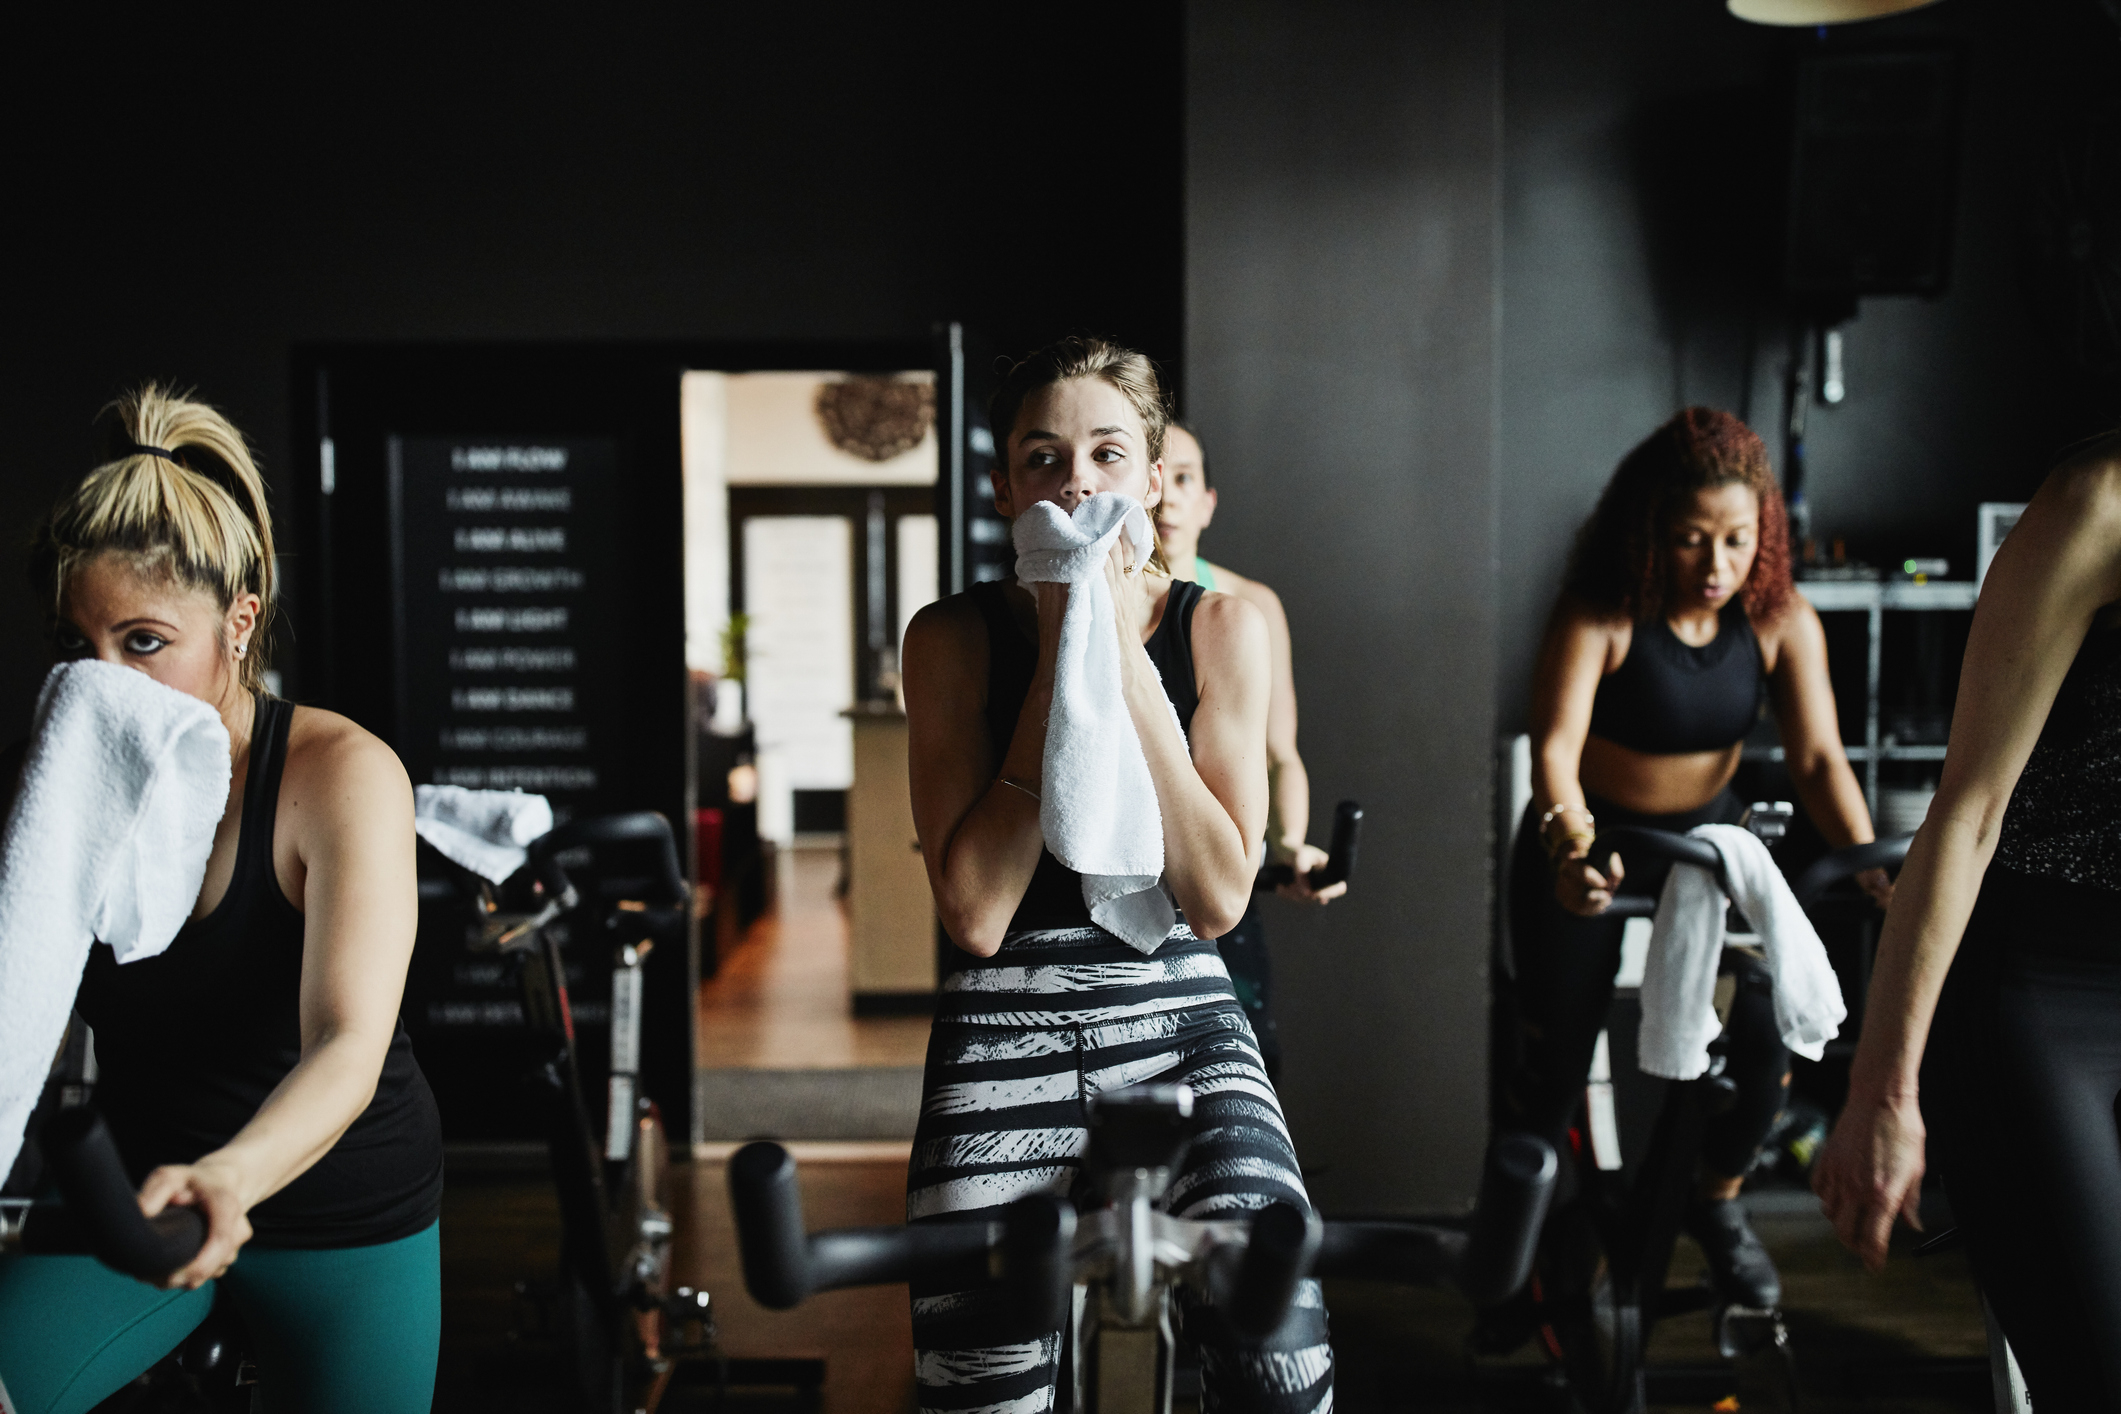 Three people wiping sweat with towels during a gym workout session